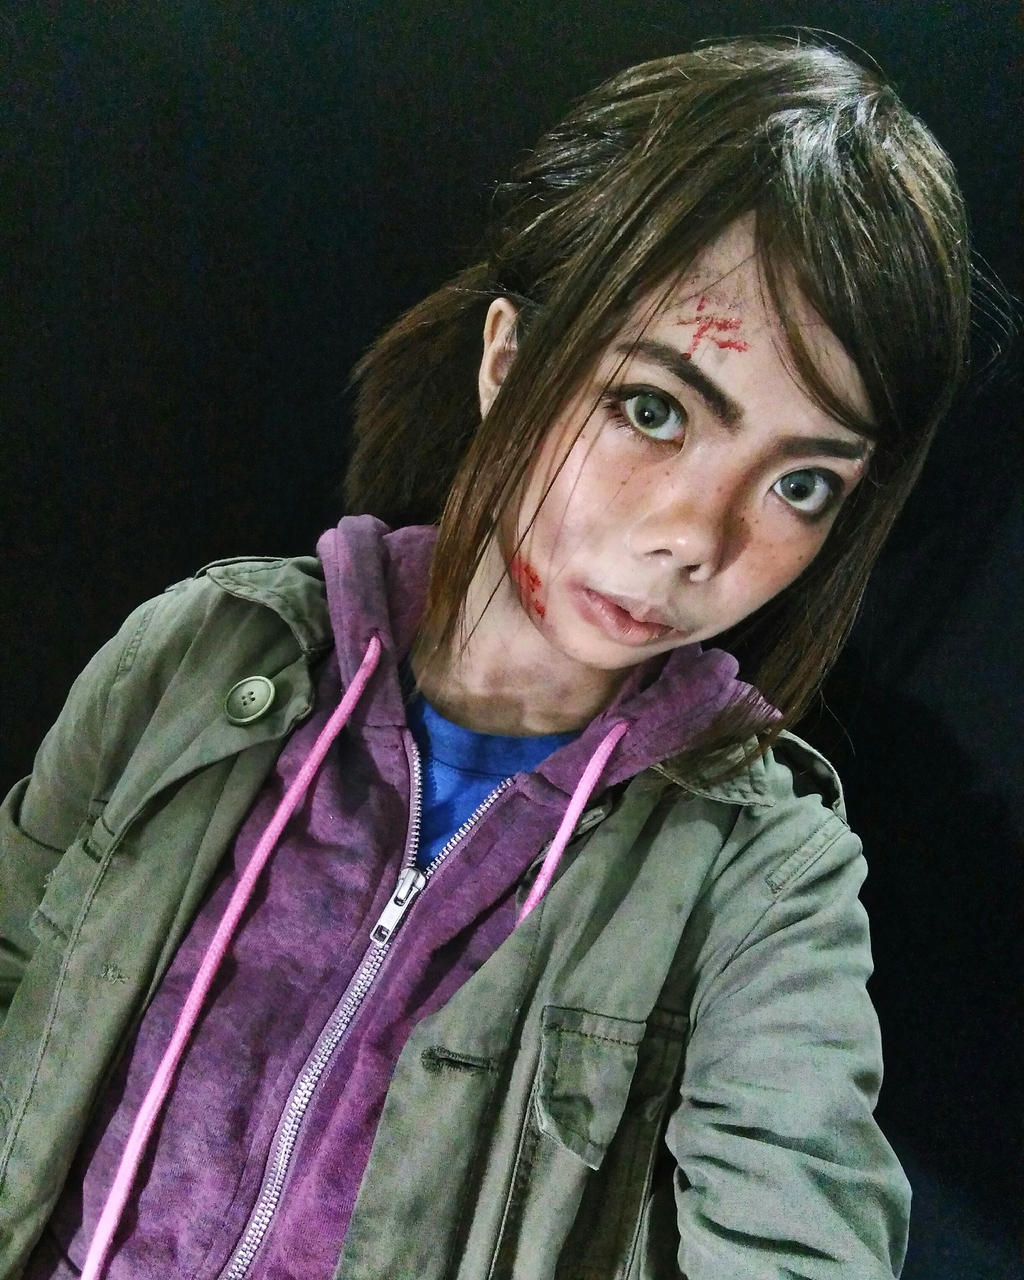 The Last of Us 2 Ellie Cosplay Captures the Woeful Grit of Survival